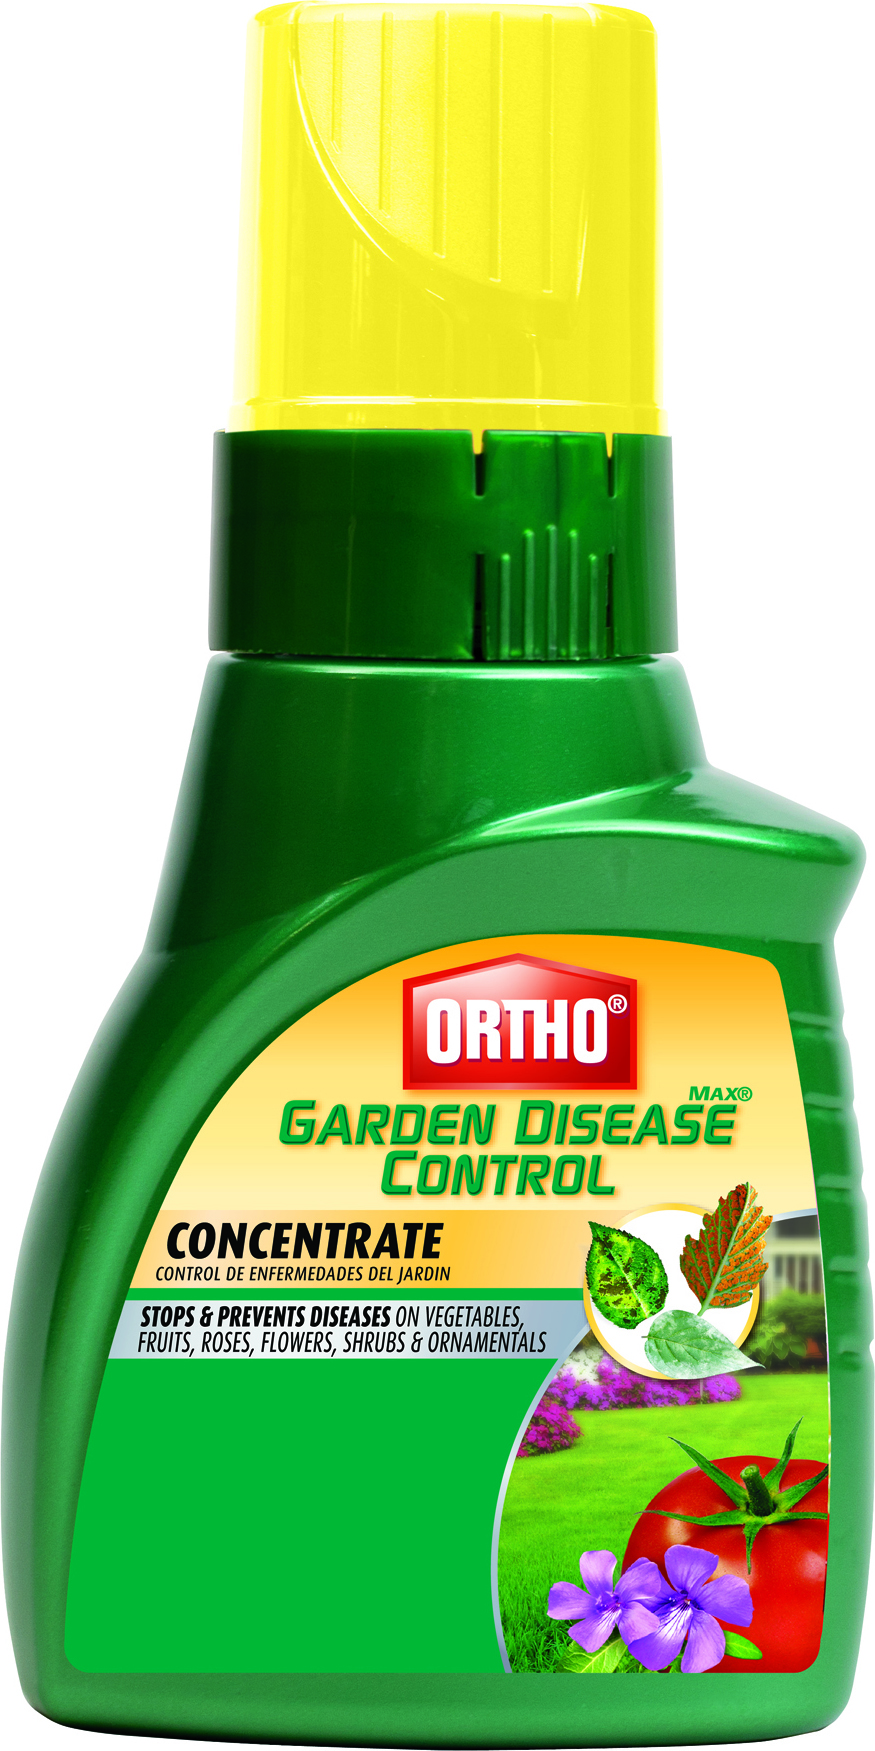 ORTHO MAX GARDEN DISEASE CONCENTRATE